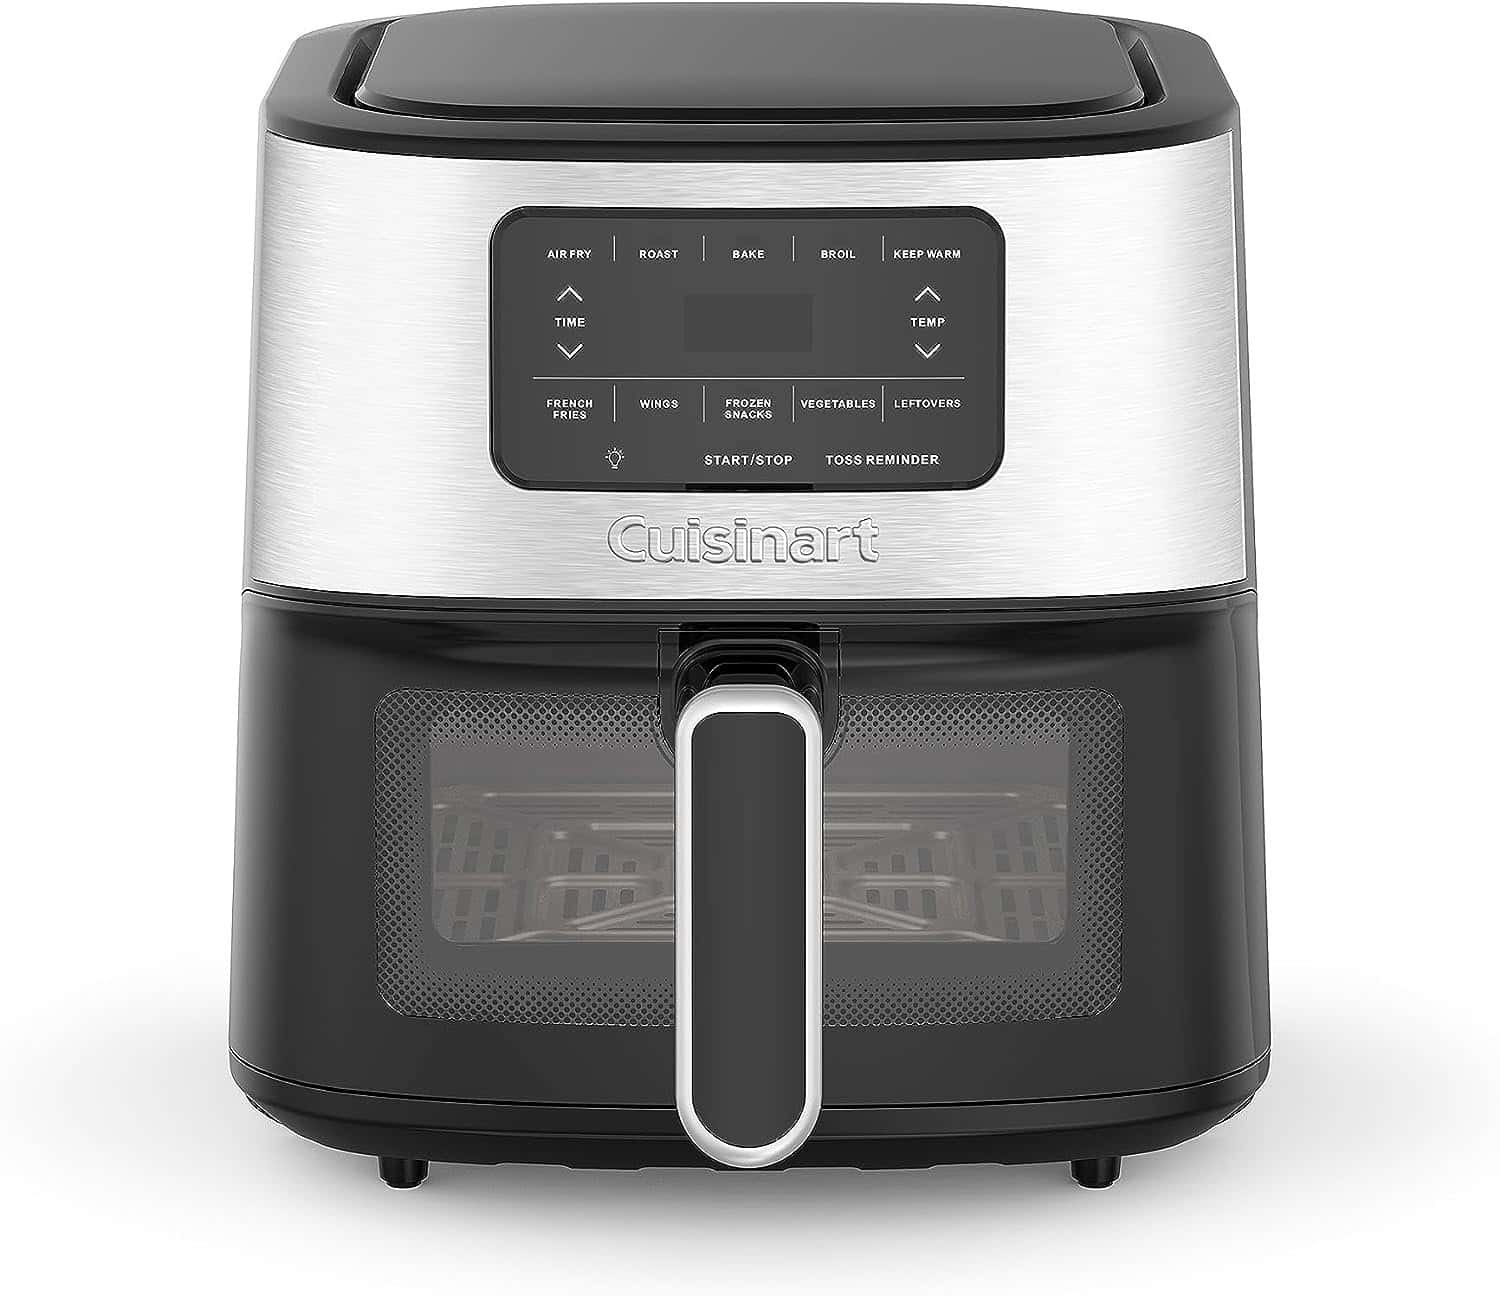 Cuisinart Airfryer Review - Taste Bud Confessions